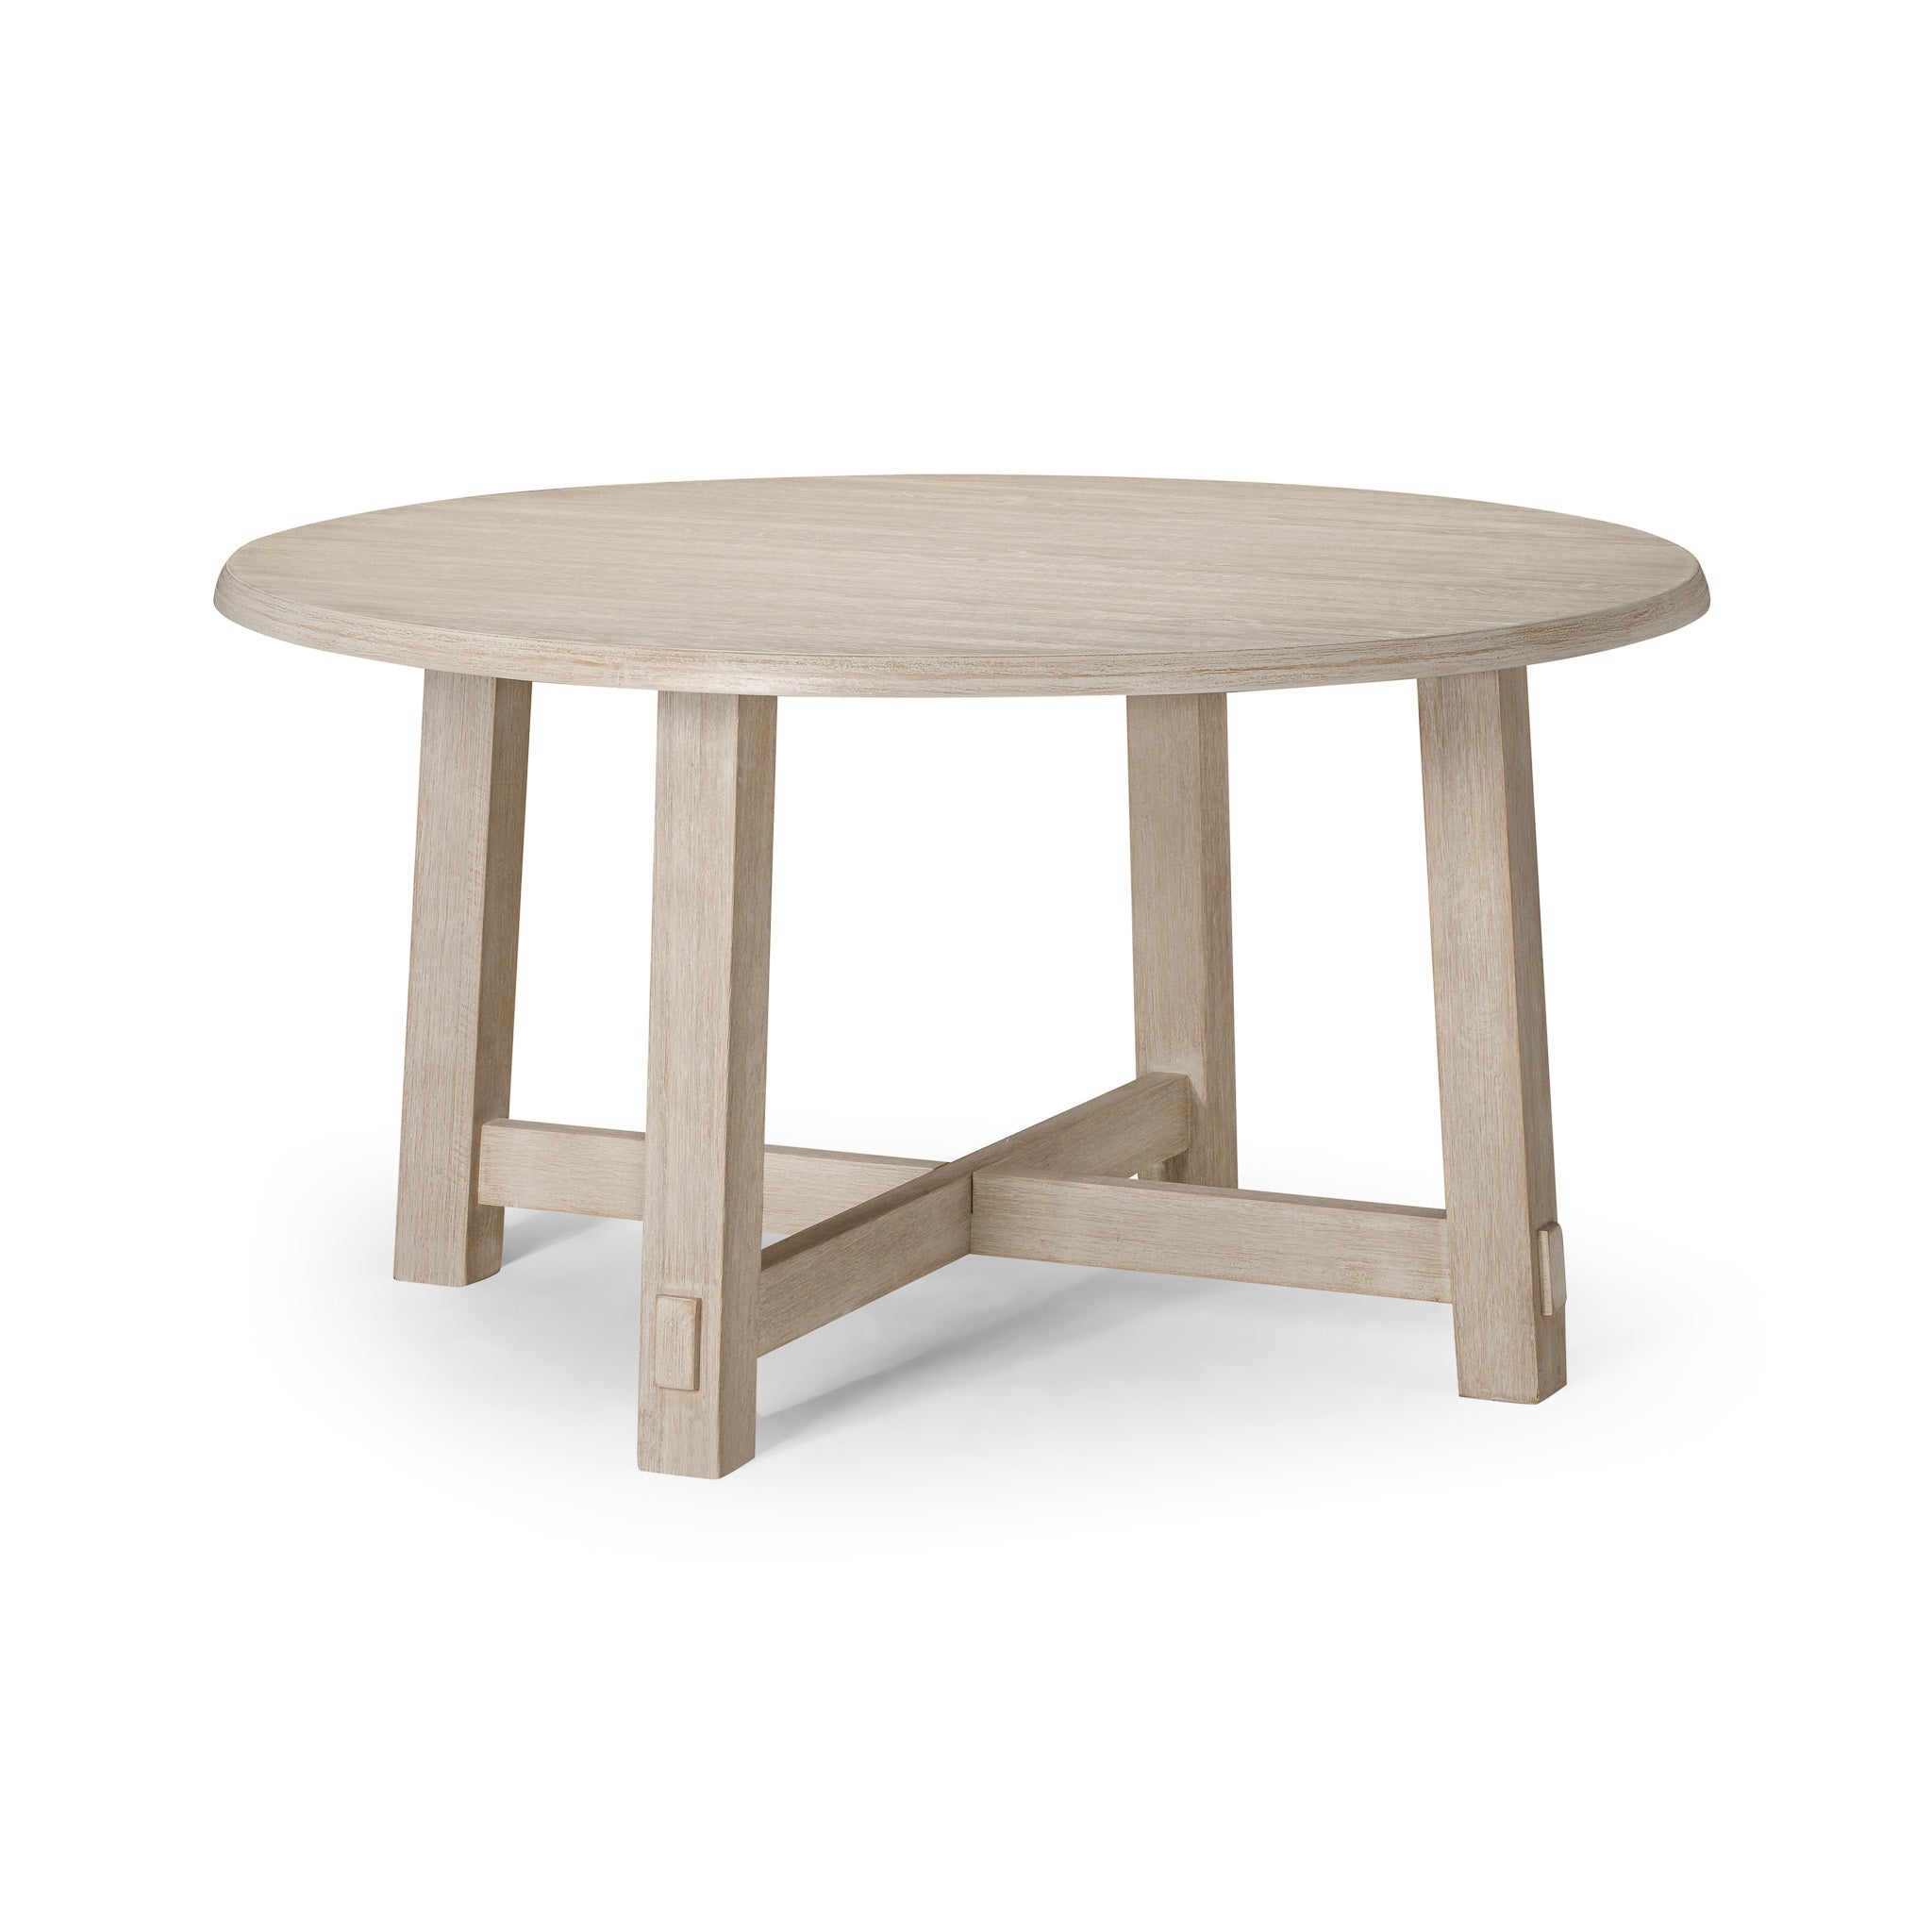 Sasha Organic Round Wooden Dining Table in Weathered White Finish in Dining Furniture by Maven Lane